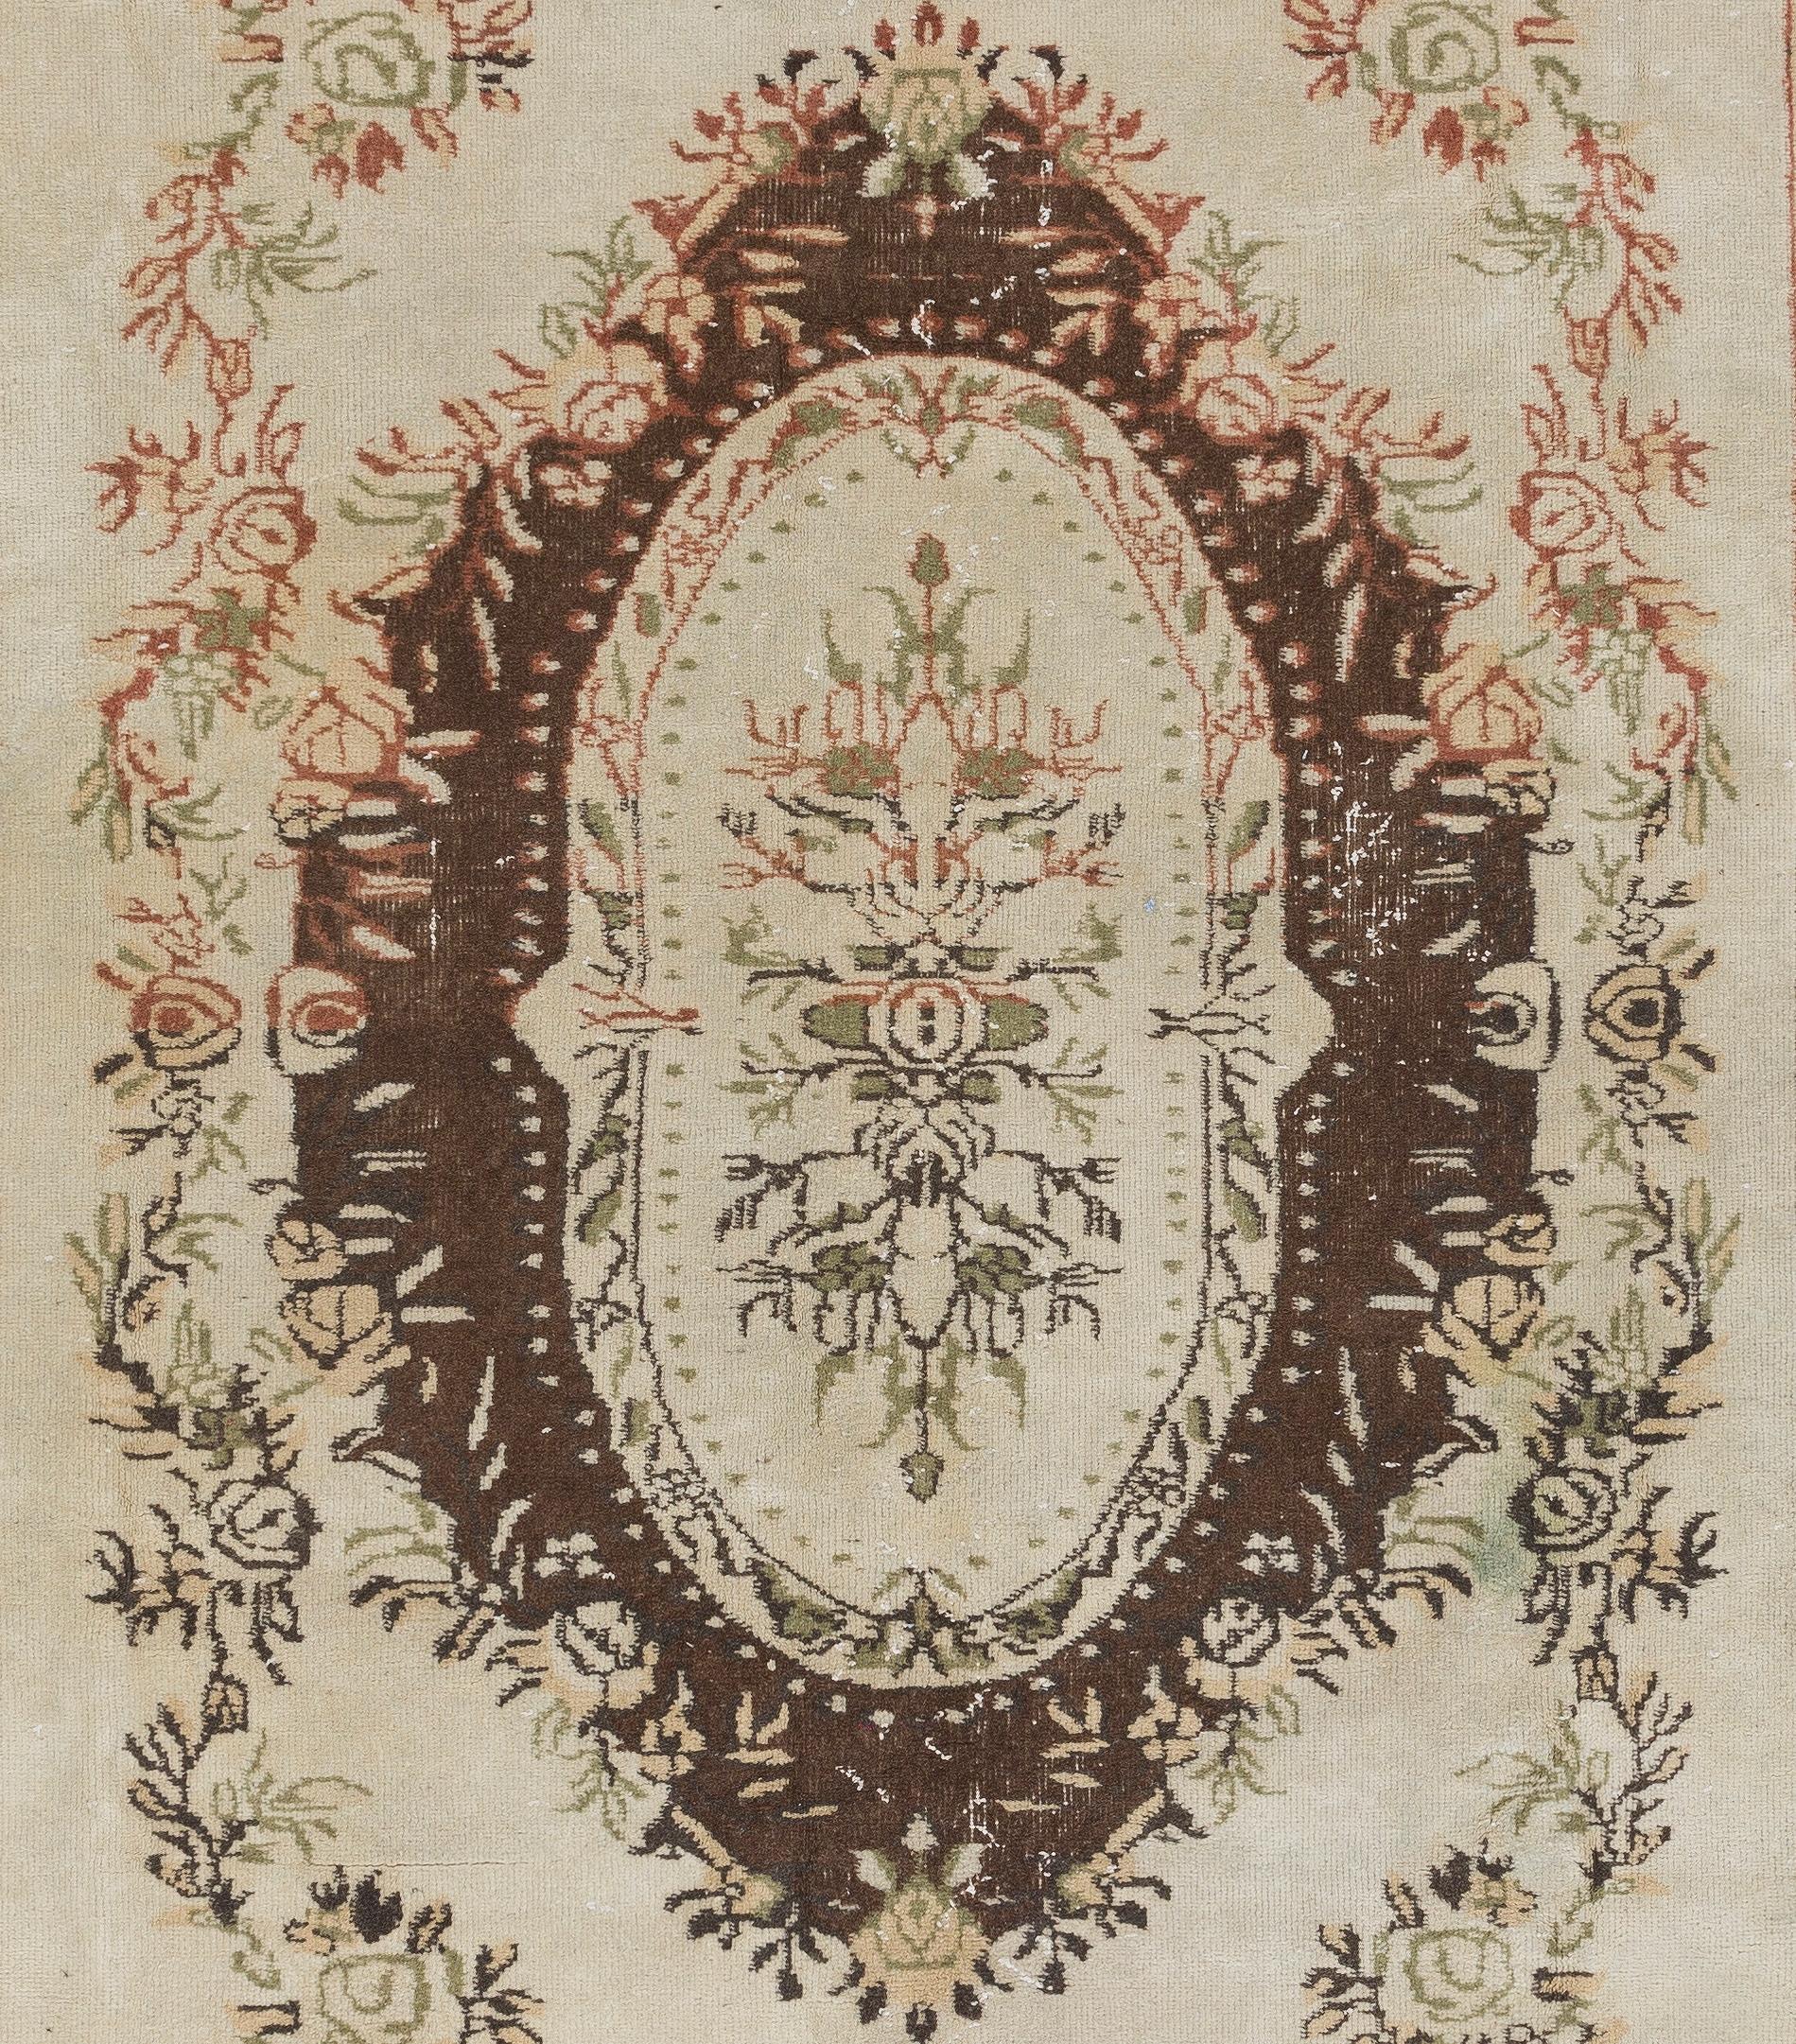 20th Century 6.7x9.3 Ft Vintage Medallion Design Oushak Rug made of Wool and Cotton Blend For Sale